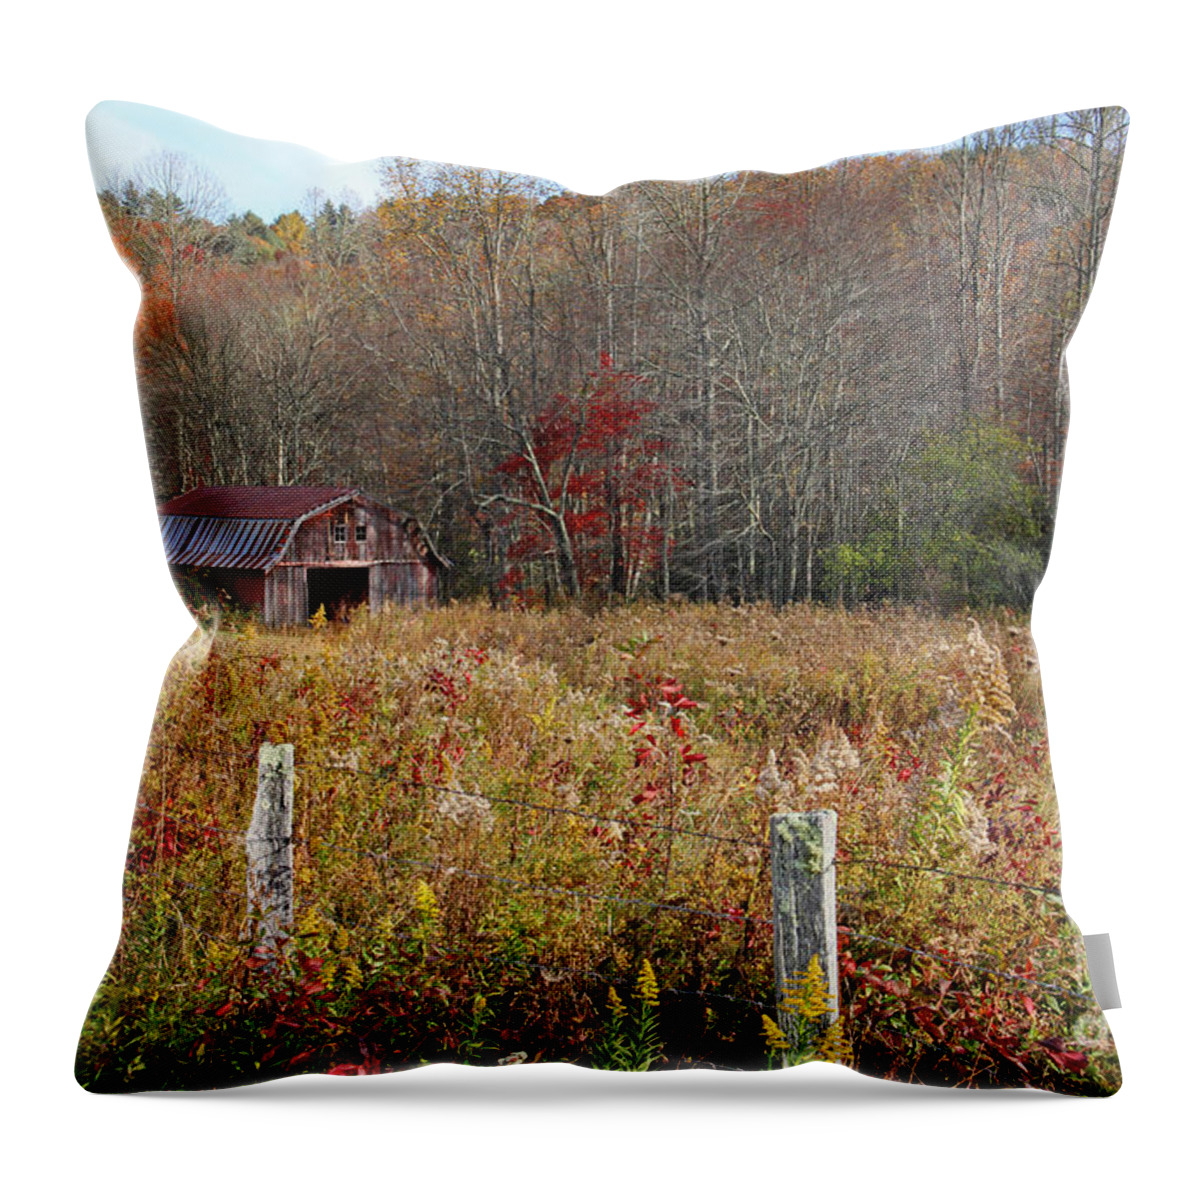 Barn Throw Pillow featuring the photograph Tucked Away - Barns by HH Photography of Florida